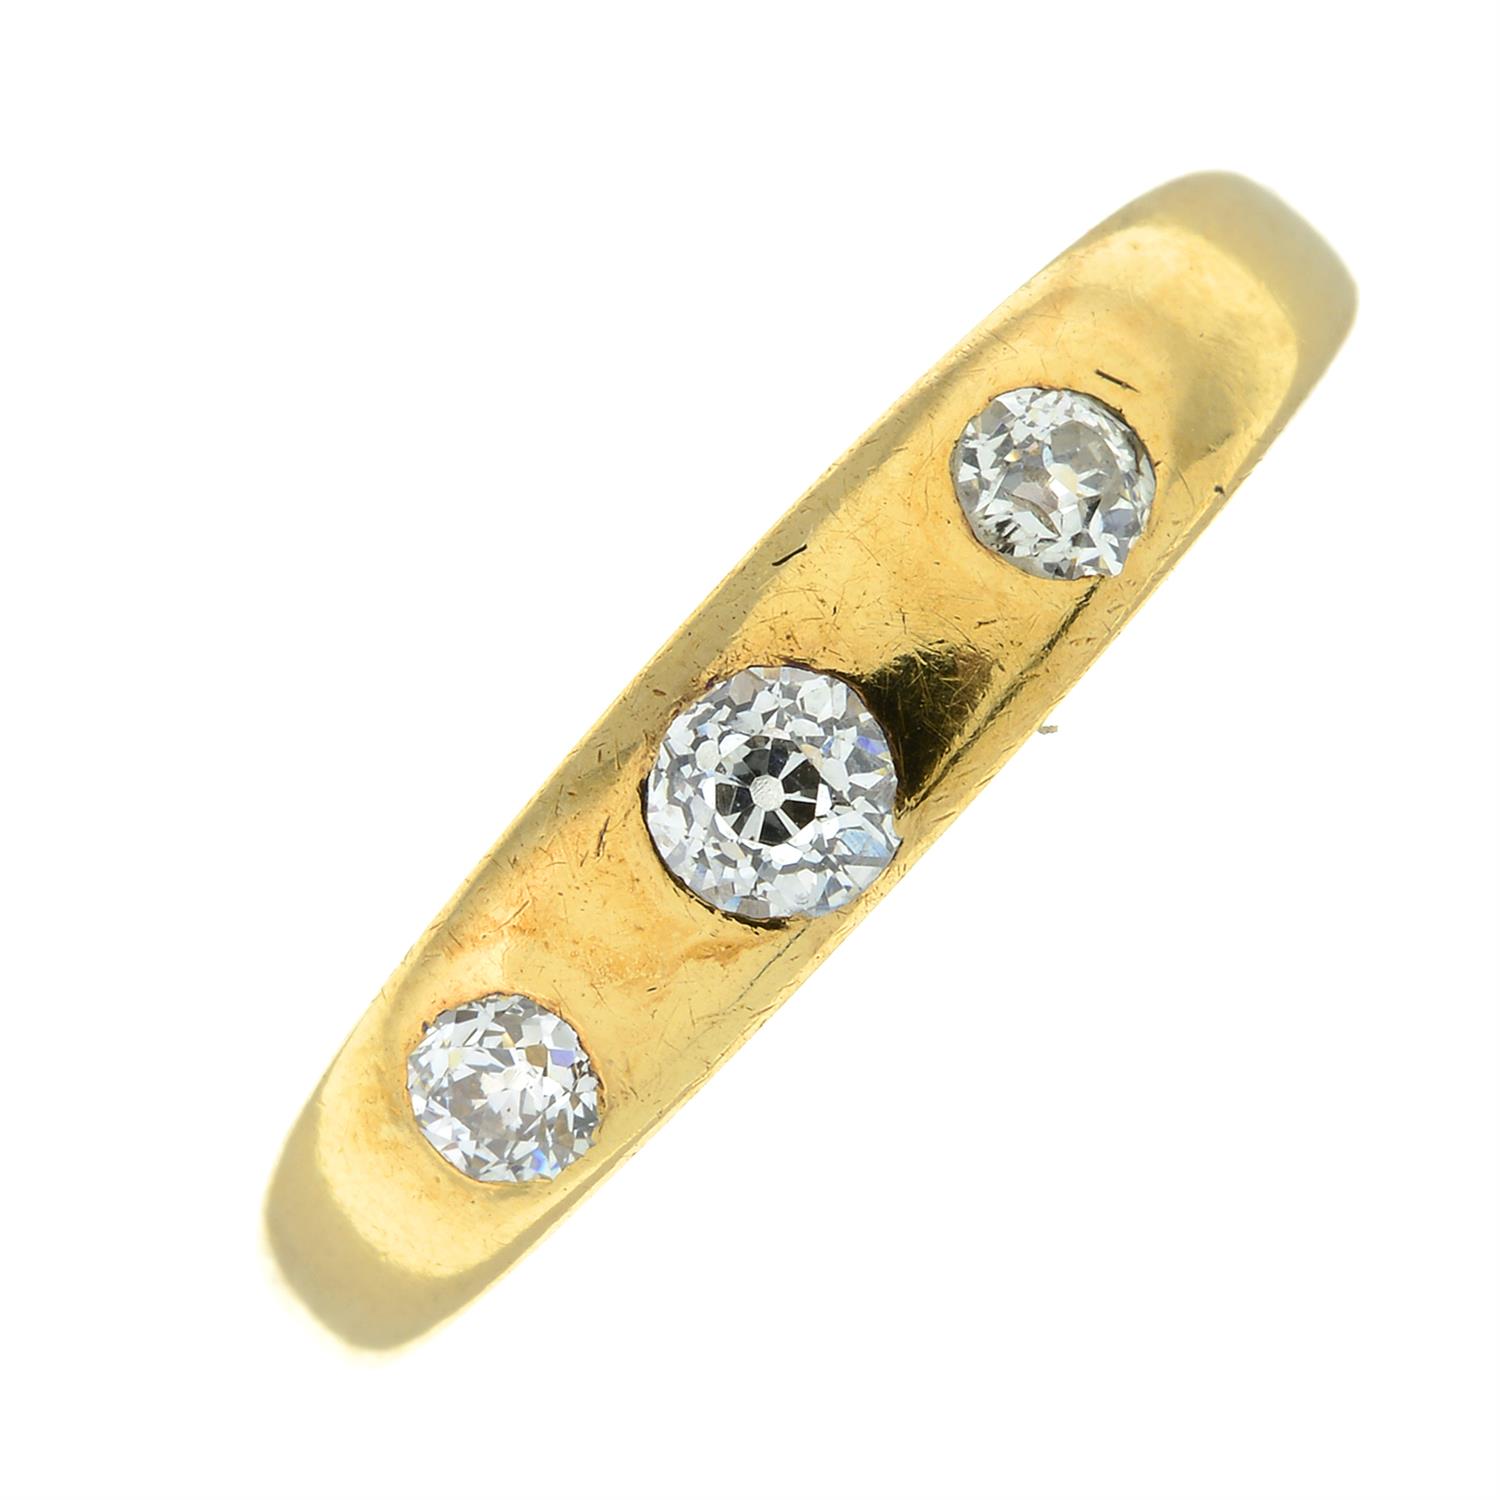 Early 20th century 18ct gold old-cut diamond ring